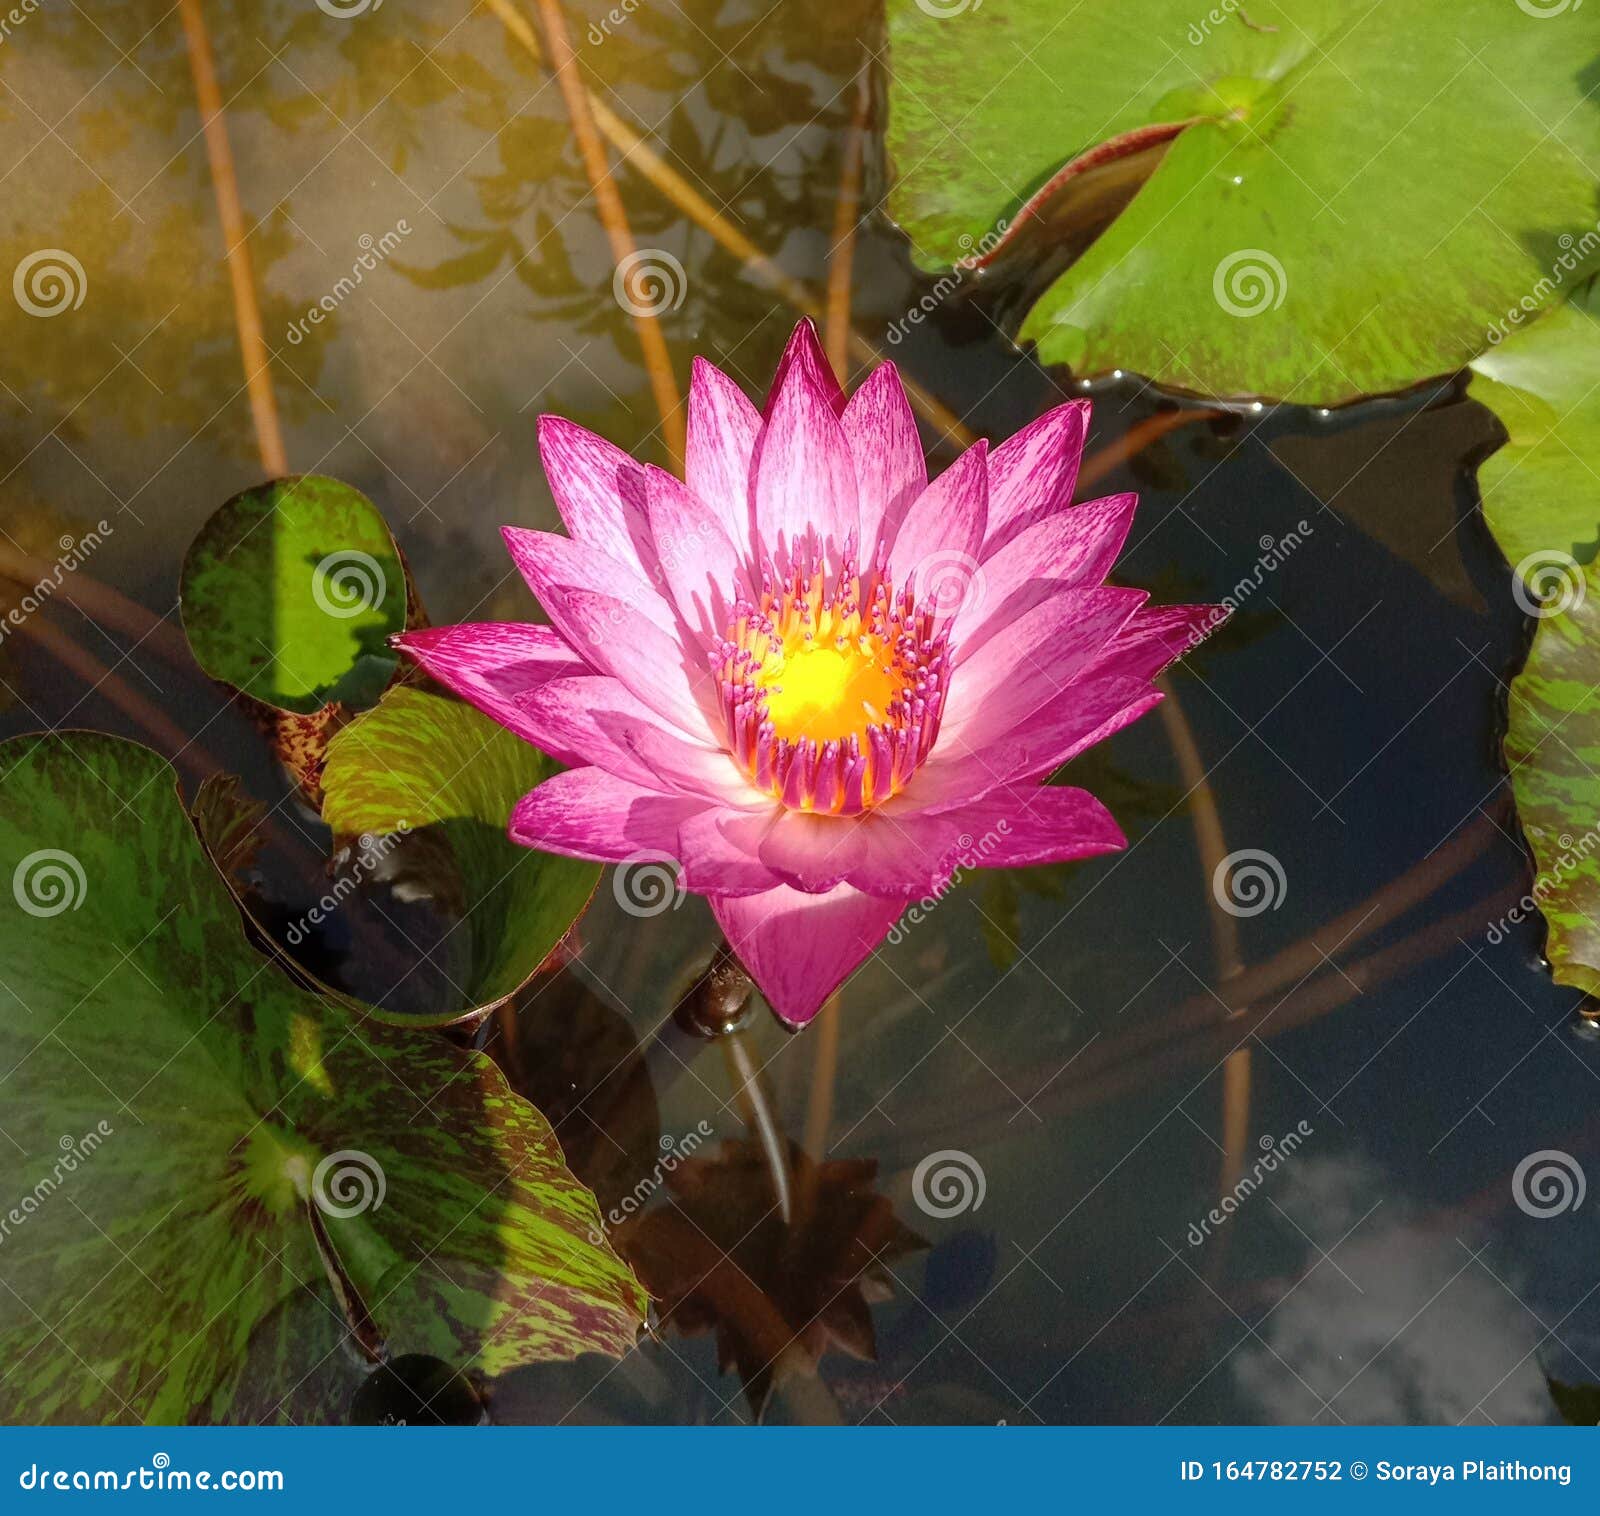 lotus flower blooming on green leaf and water surface is considered a  of virtue. belief has existed since the modern era.